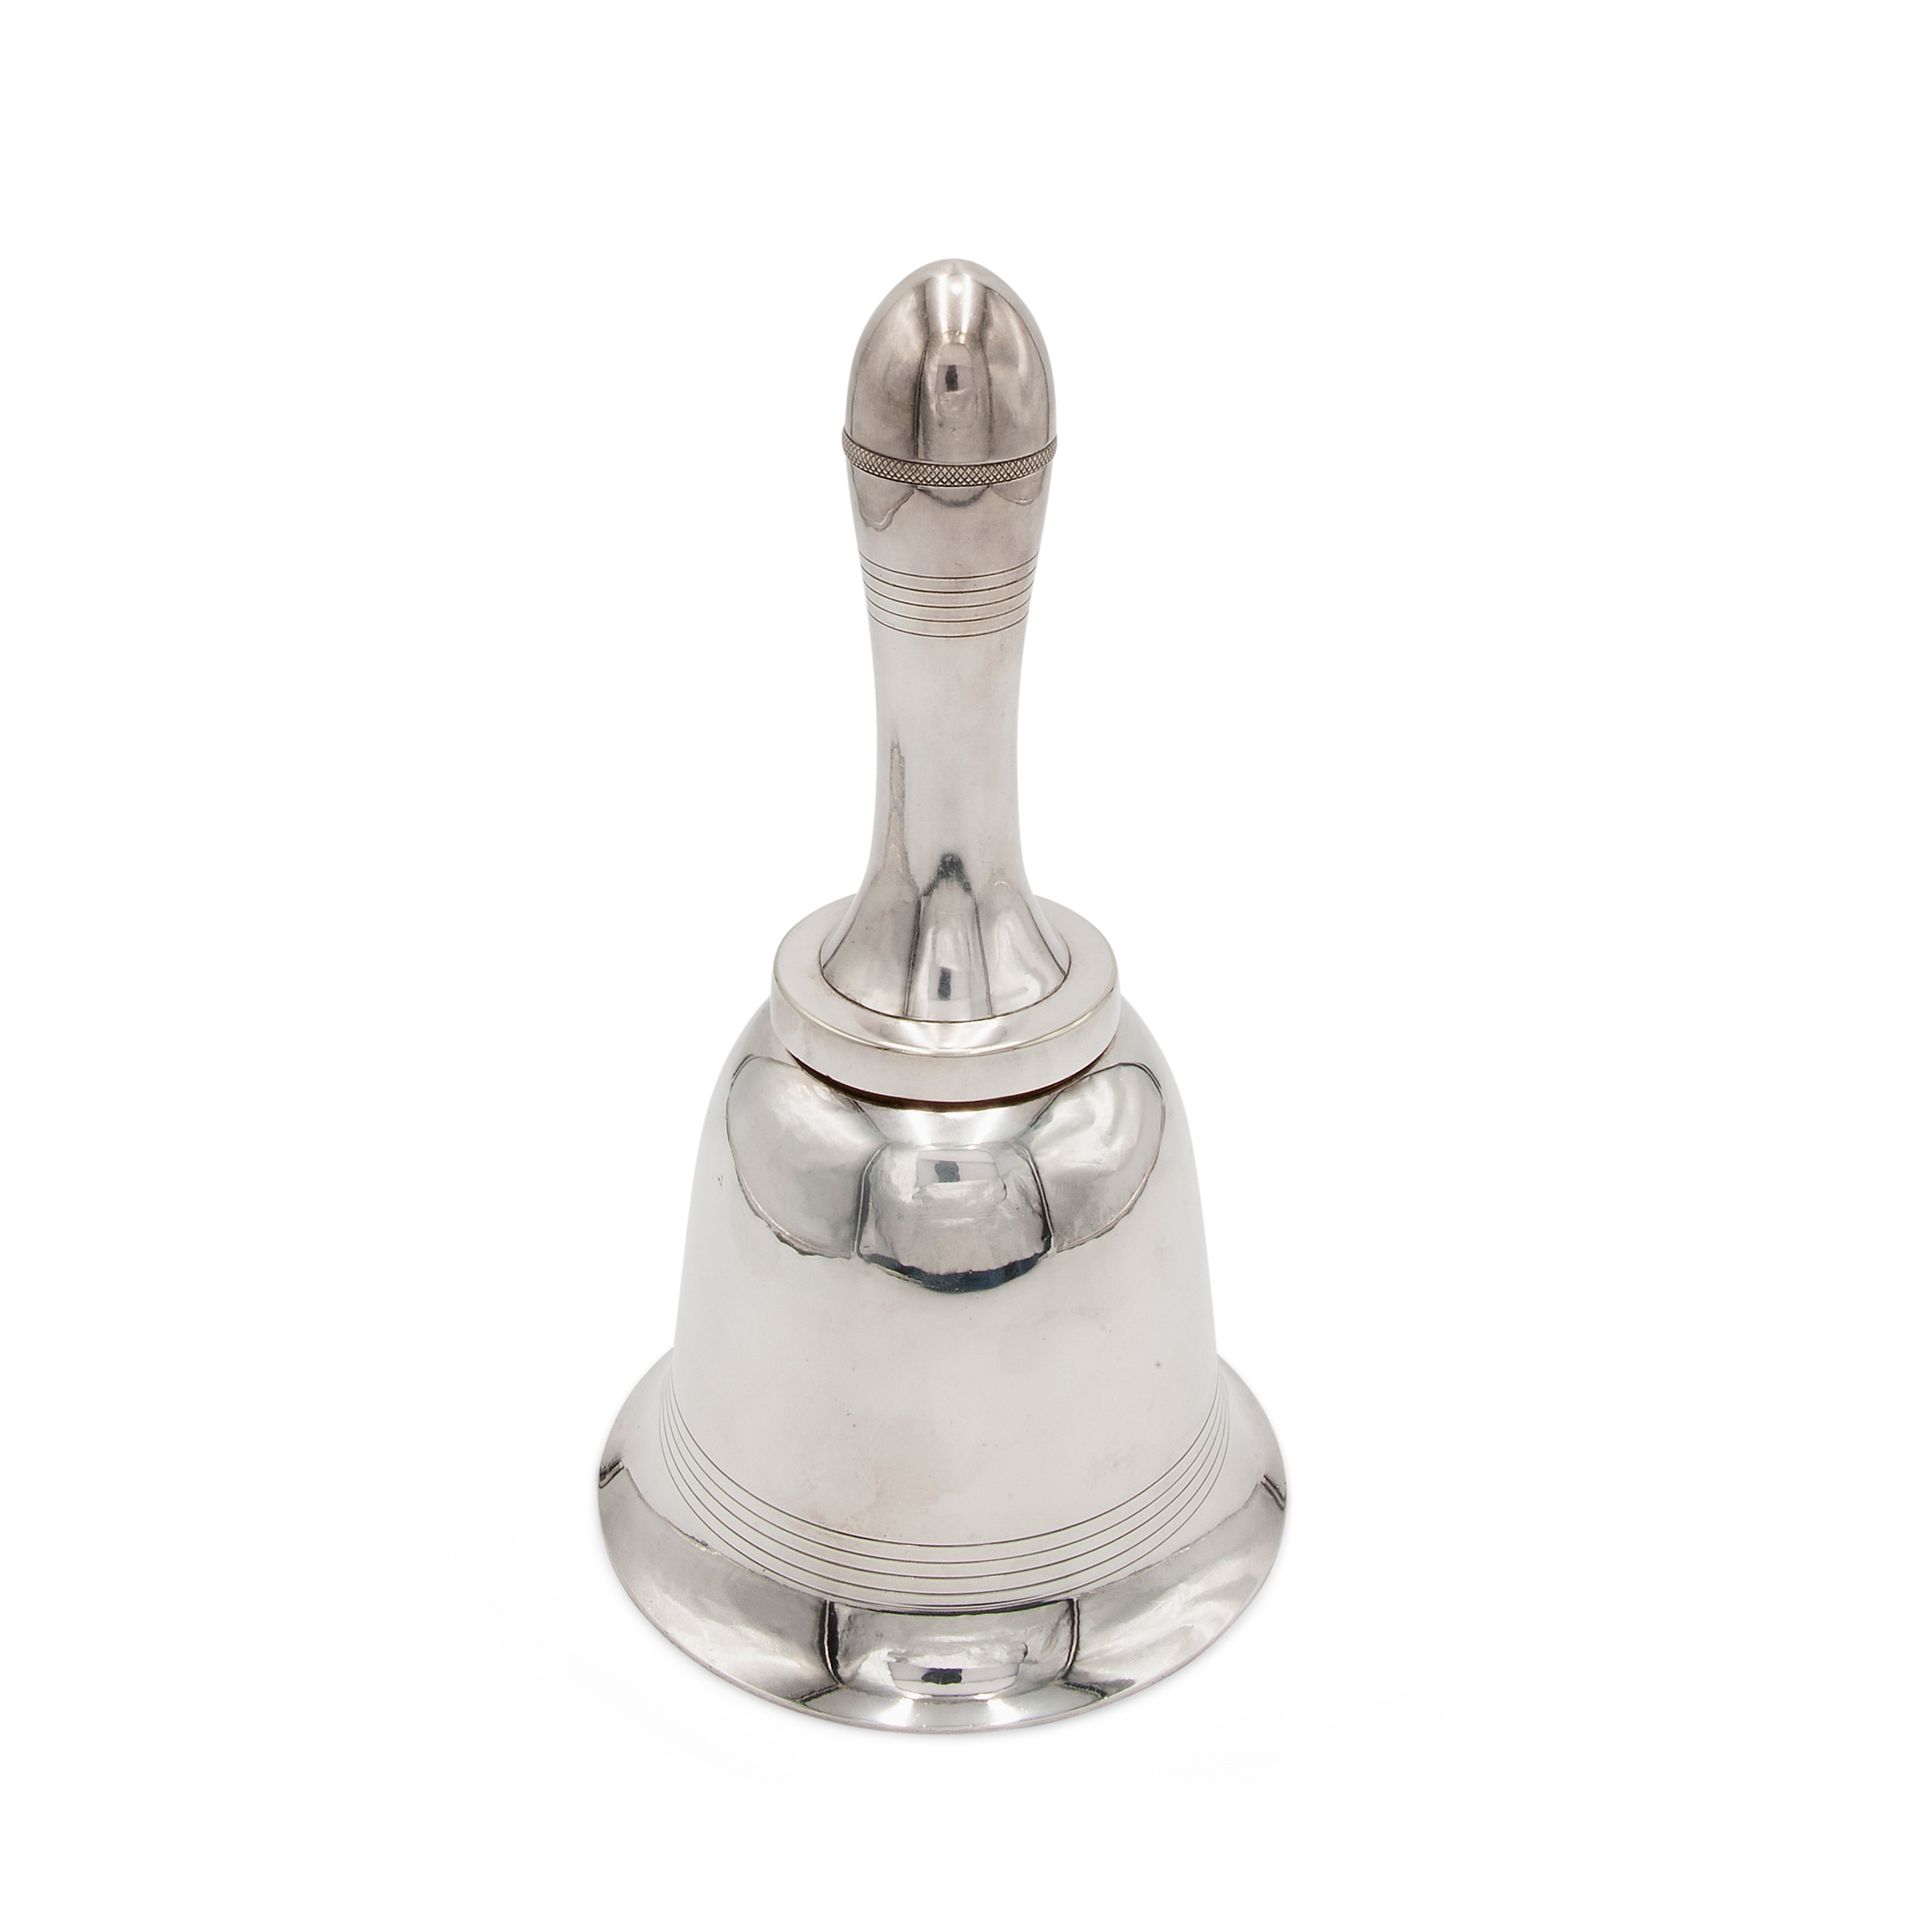 Edward & Sons, Bell-shaped cocktail shaker, circa 1935 Realizzato in metallo arg&hellip;